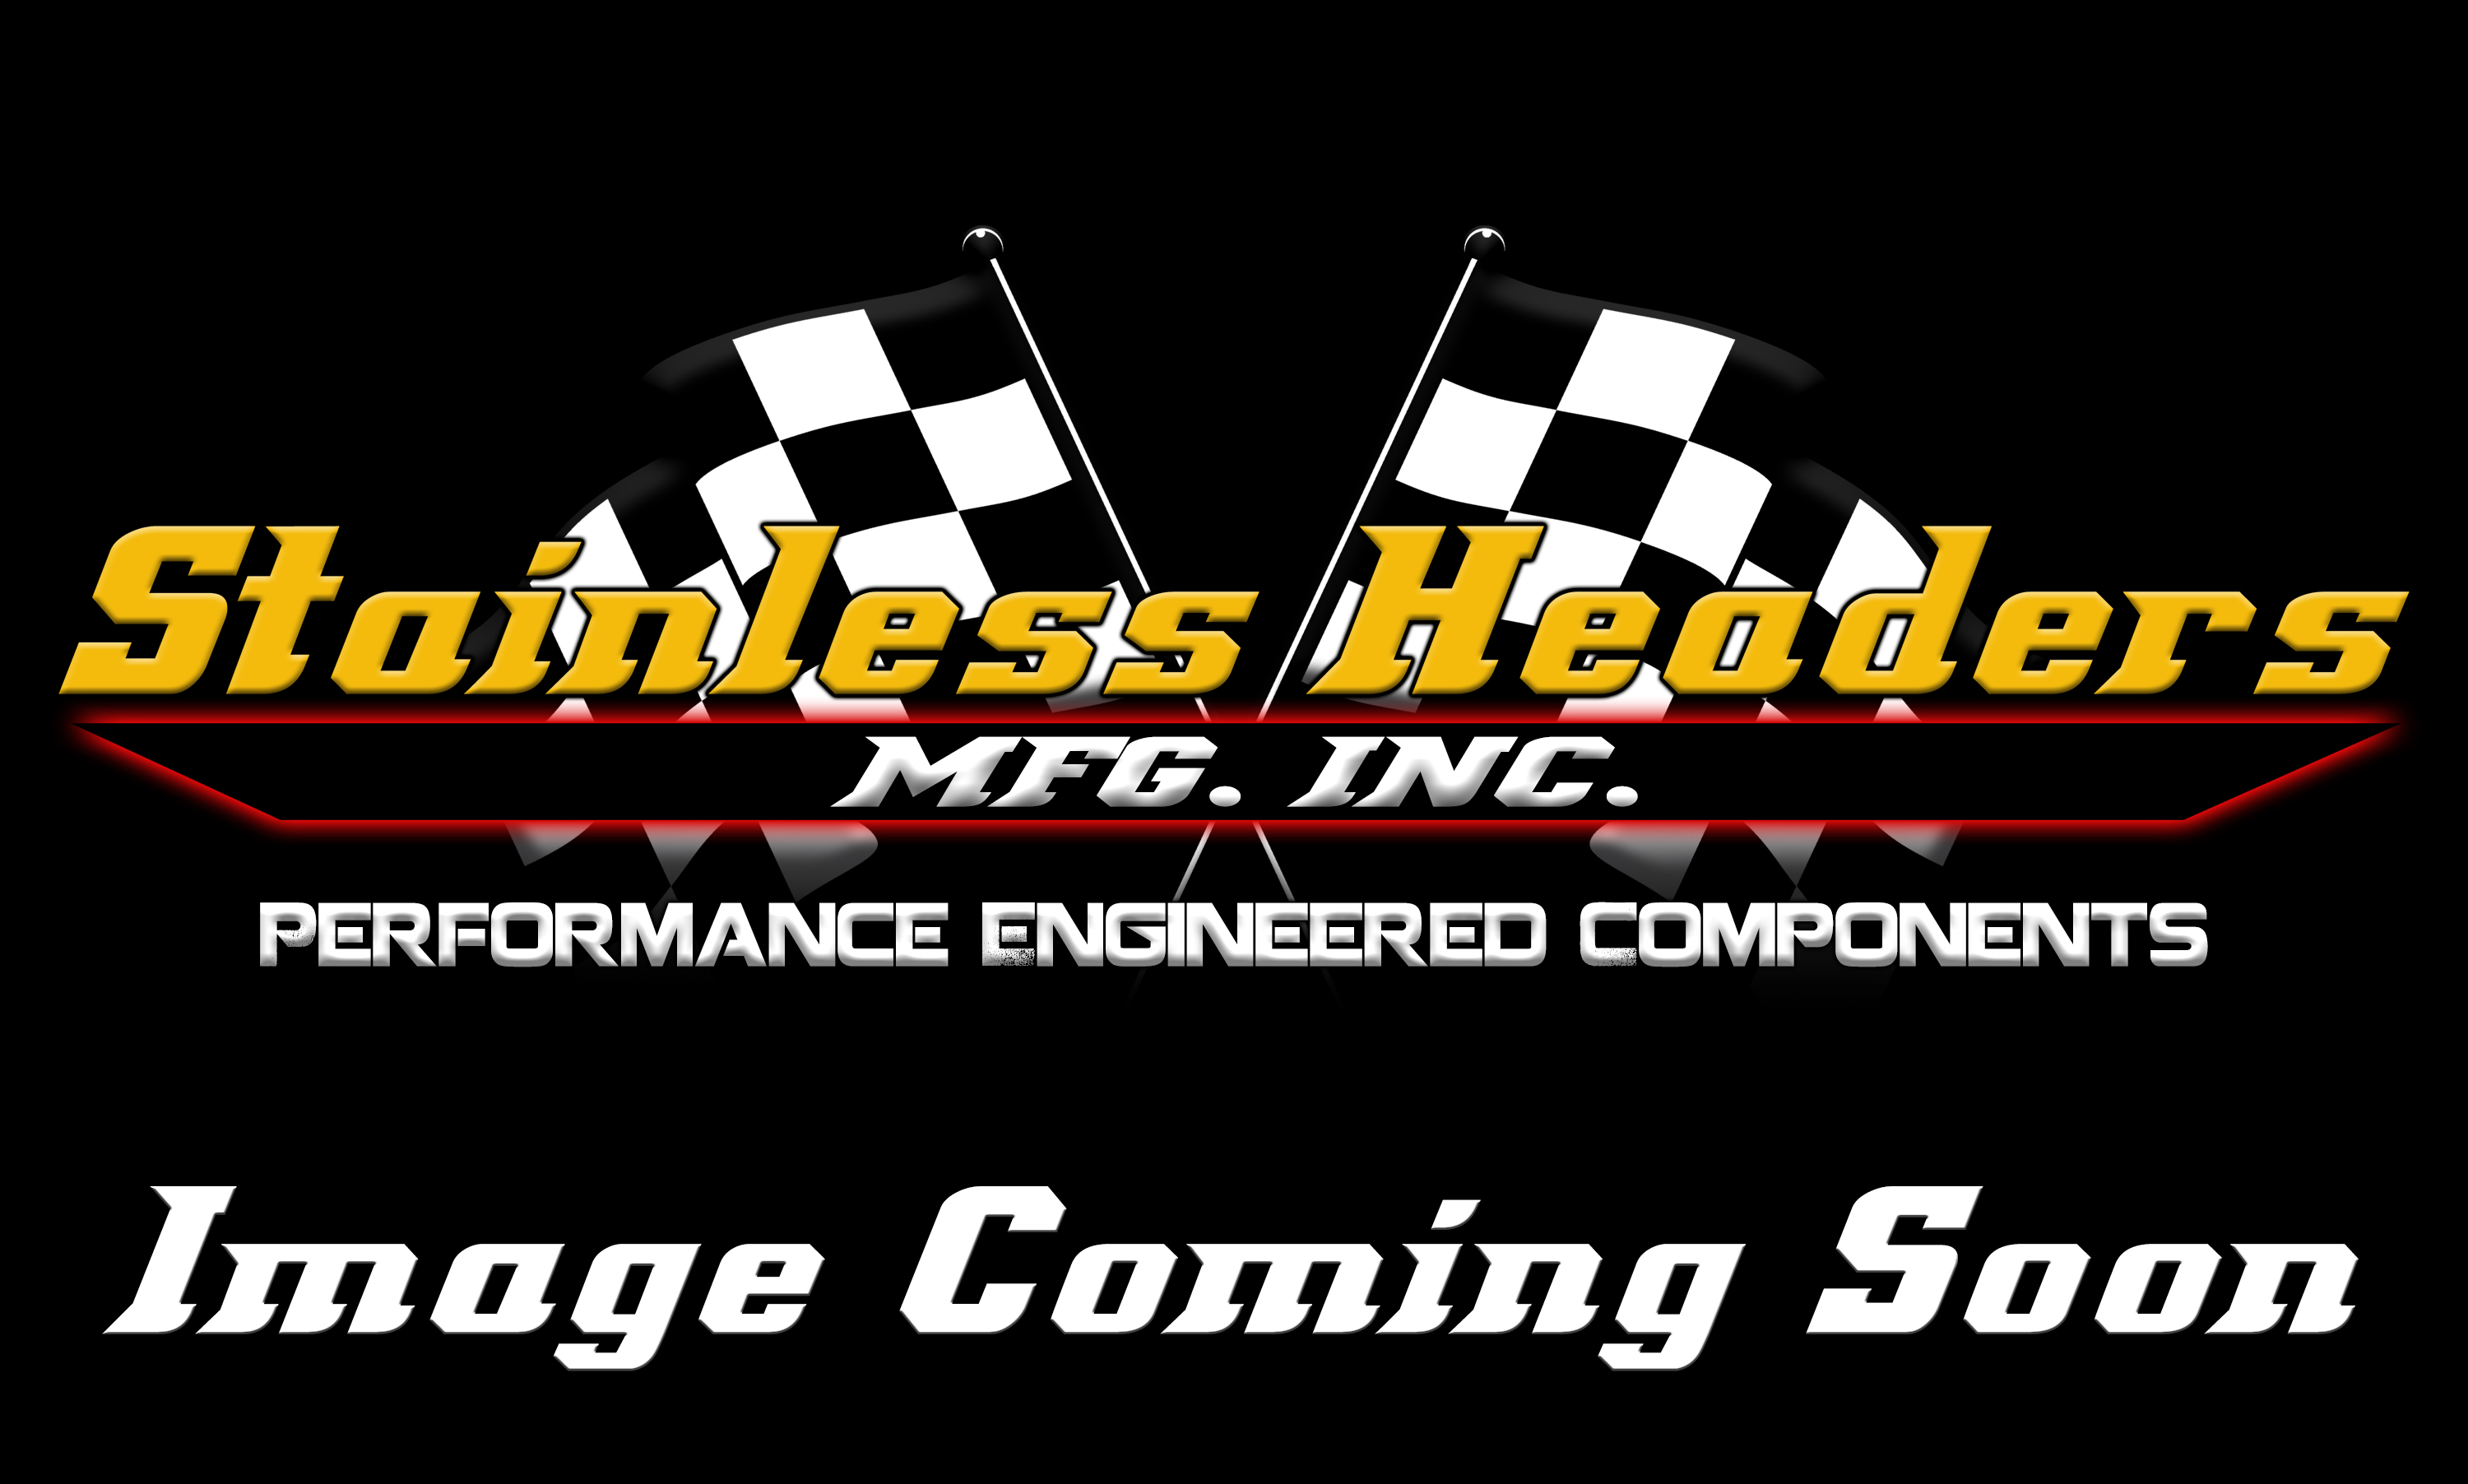 CompTurbo Technologies - CTR4204R-7490 Mid Frame Oil-Less 3.0 Turbocharger (1300 HP)